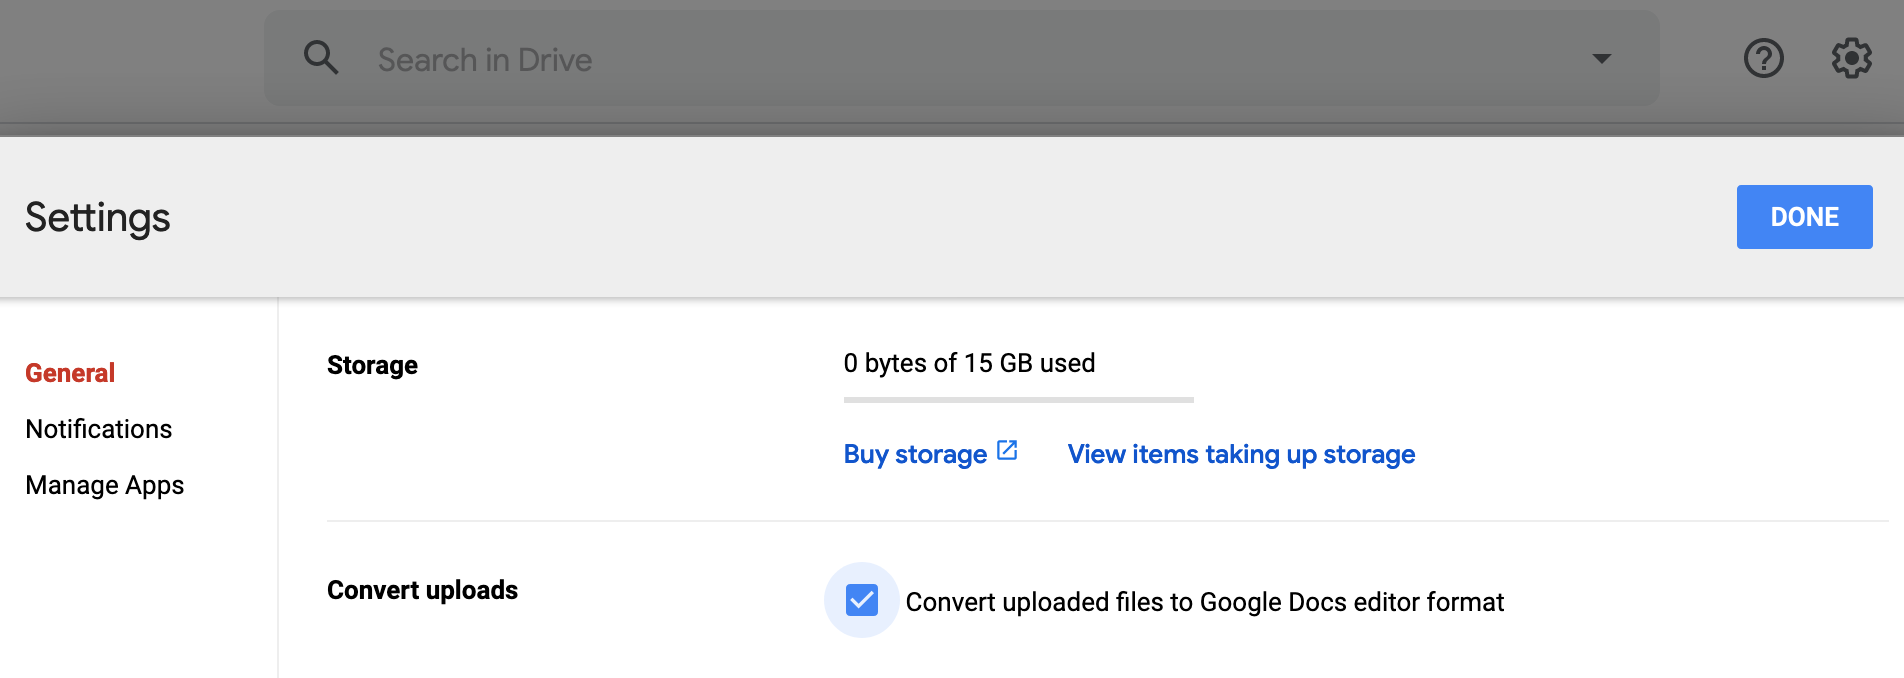 Inside your Google Drive Settings, check the box to automatically convert all uploads.